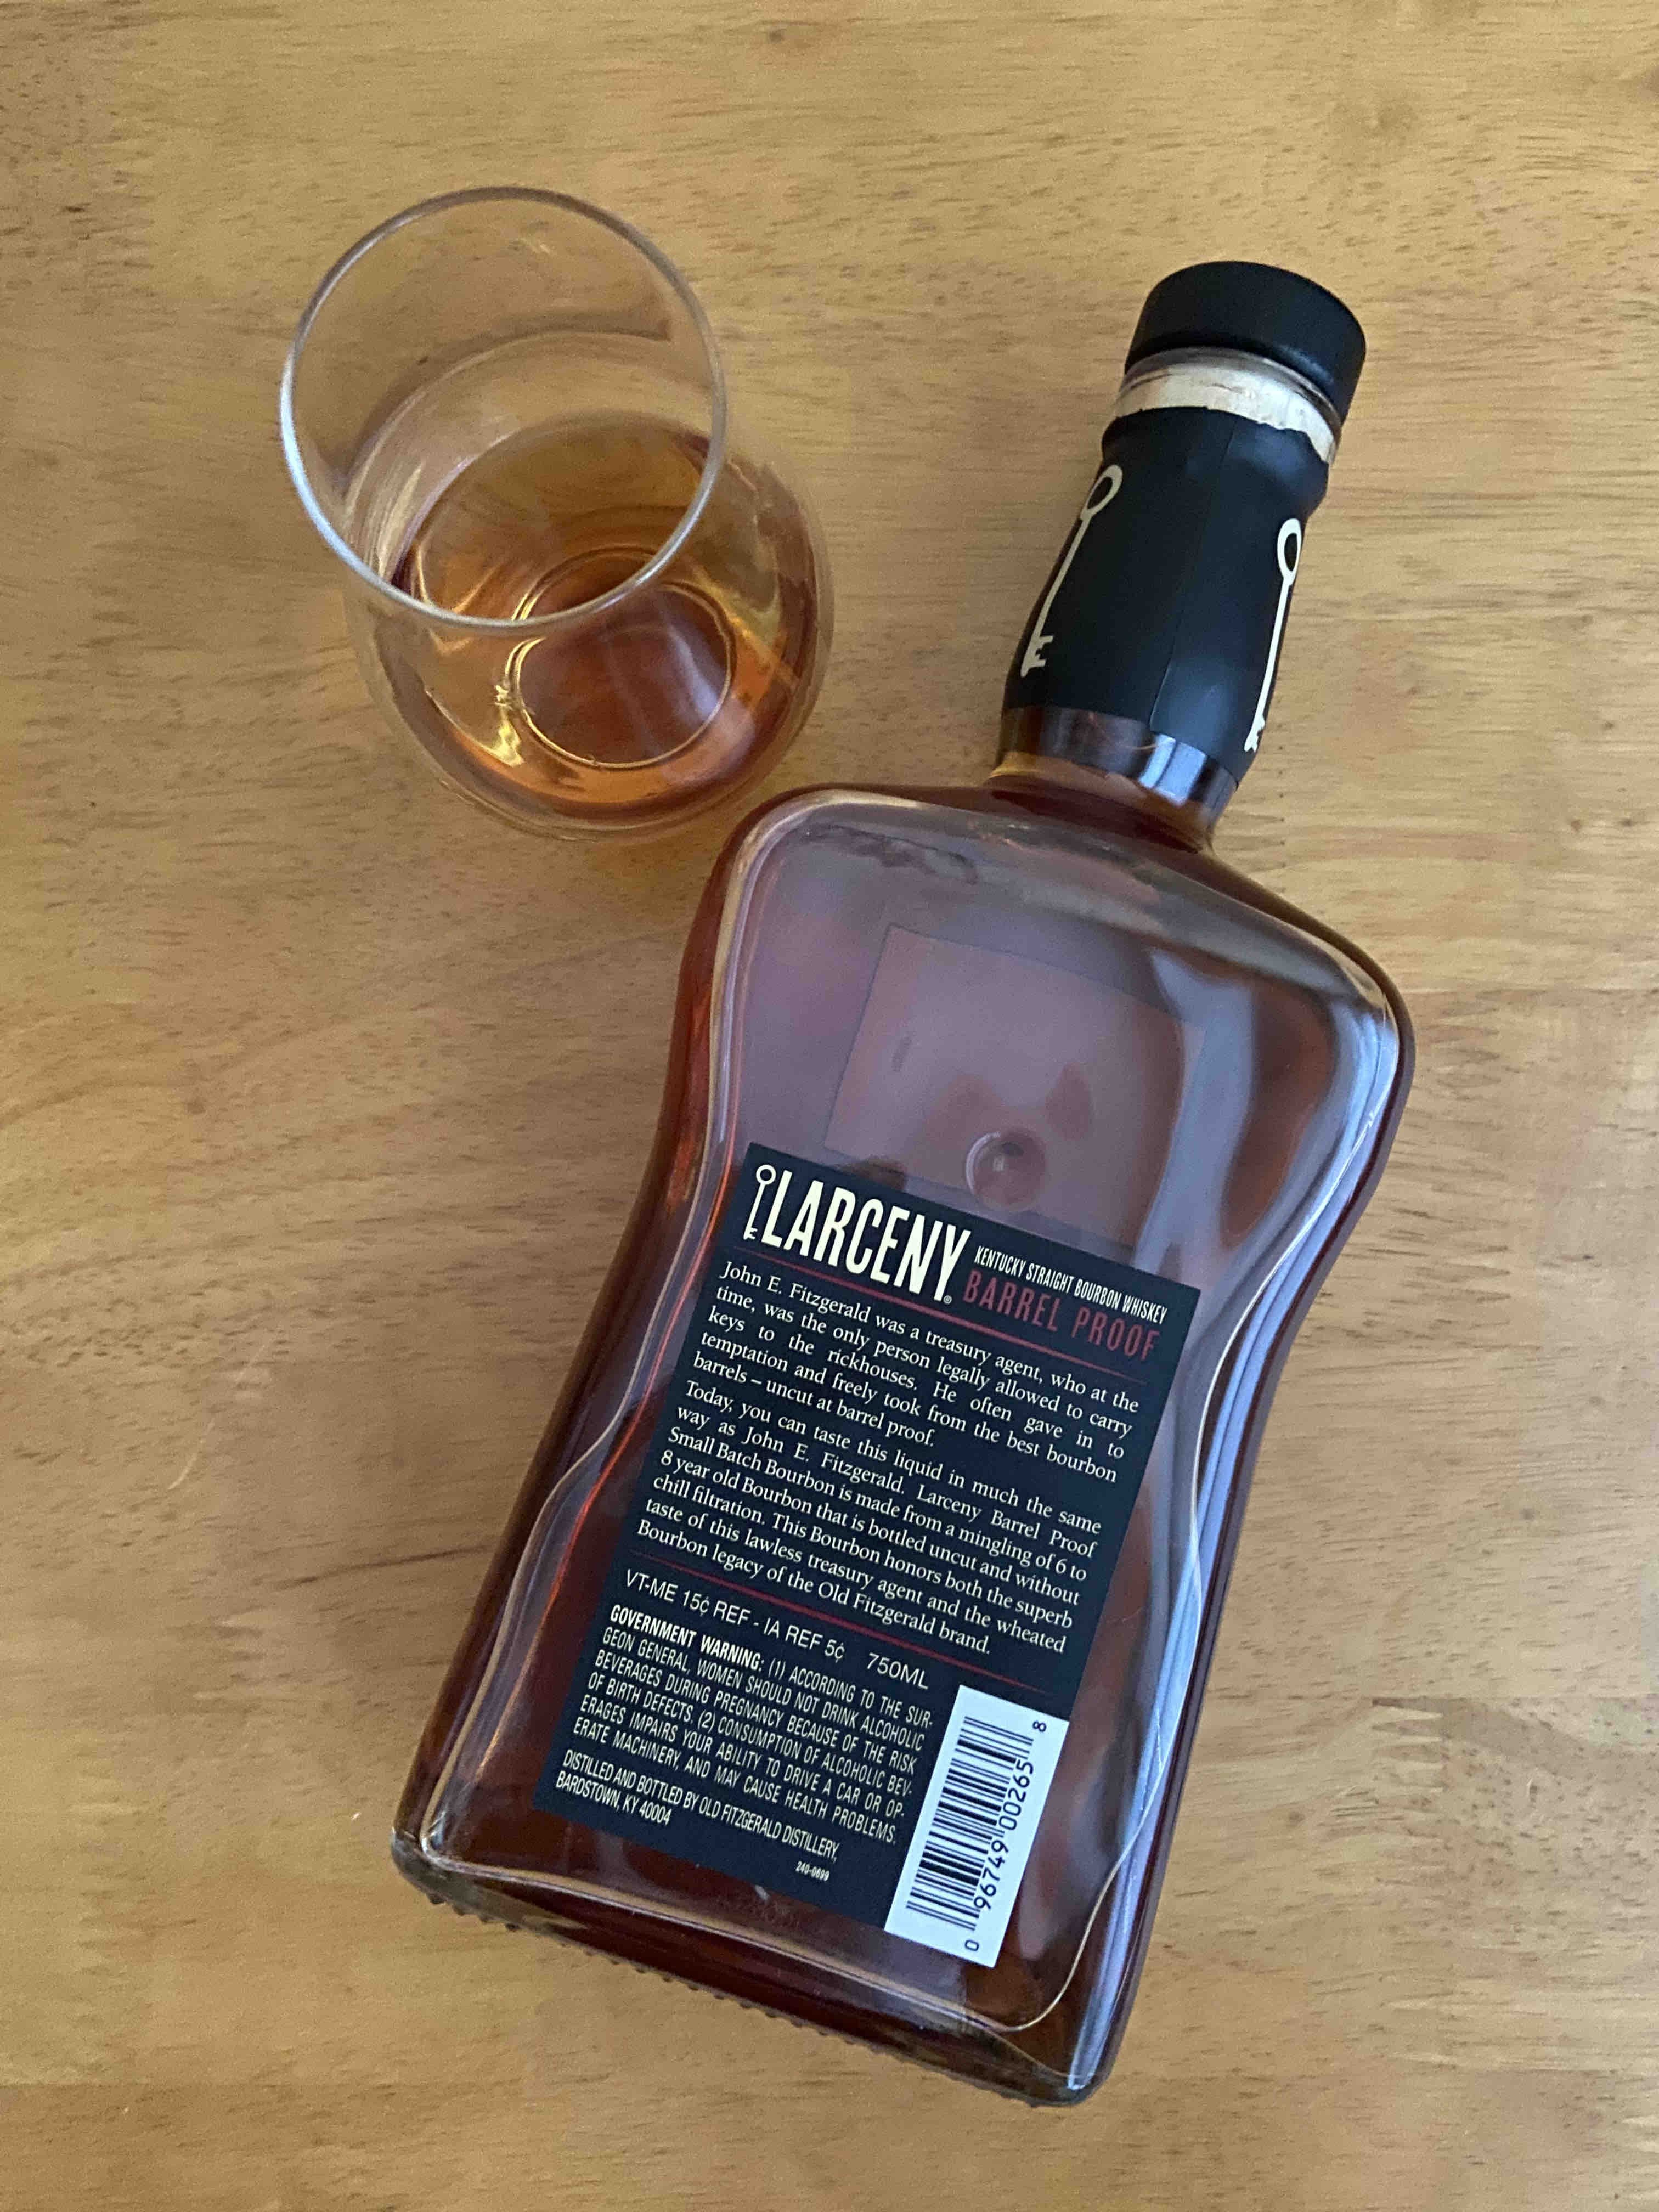 The back of the Larceny Barrel Proof label tells a story of John E. Fitzgerald, a treasury agent that was an important figure in the distilling industry in the late 1800’s. 